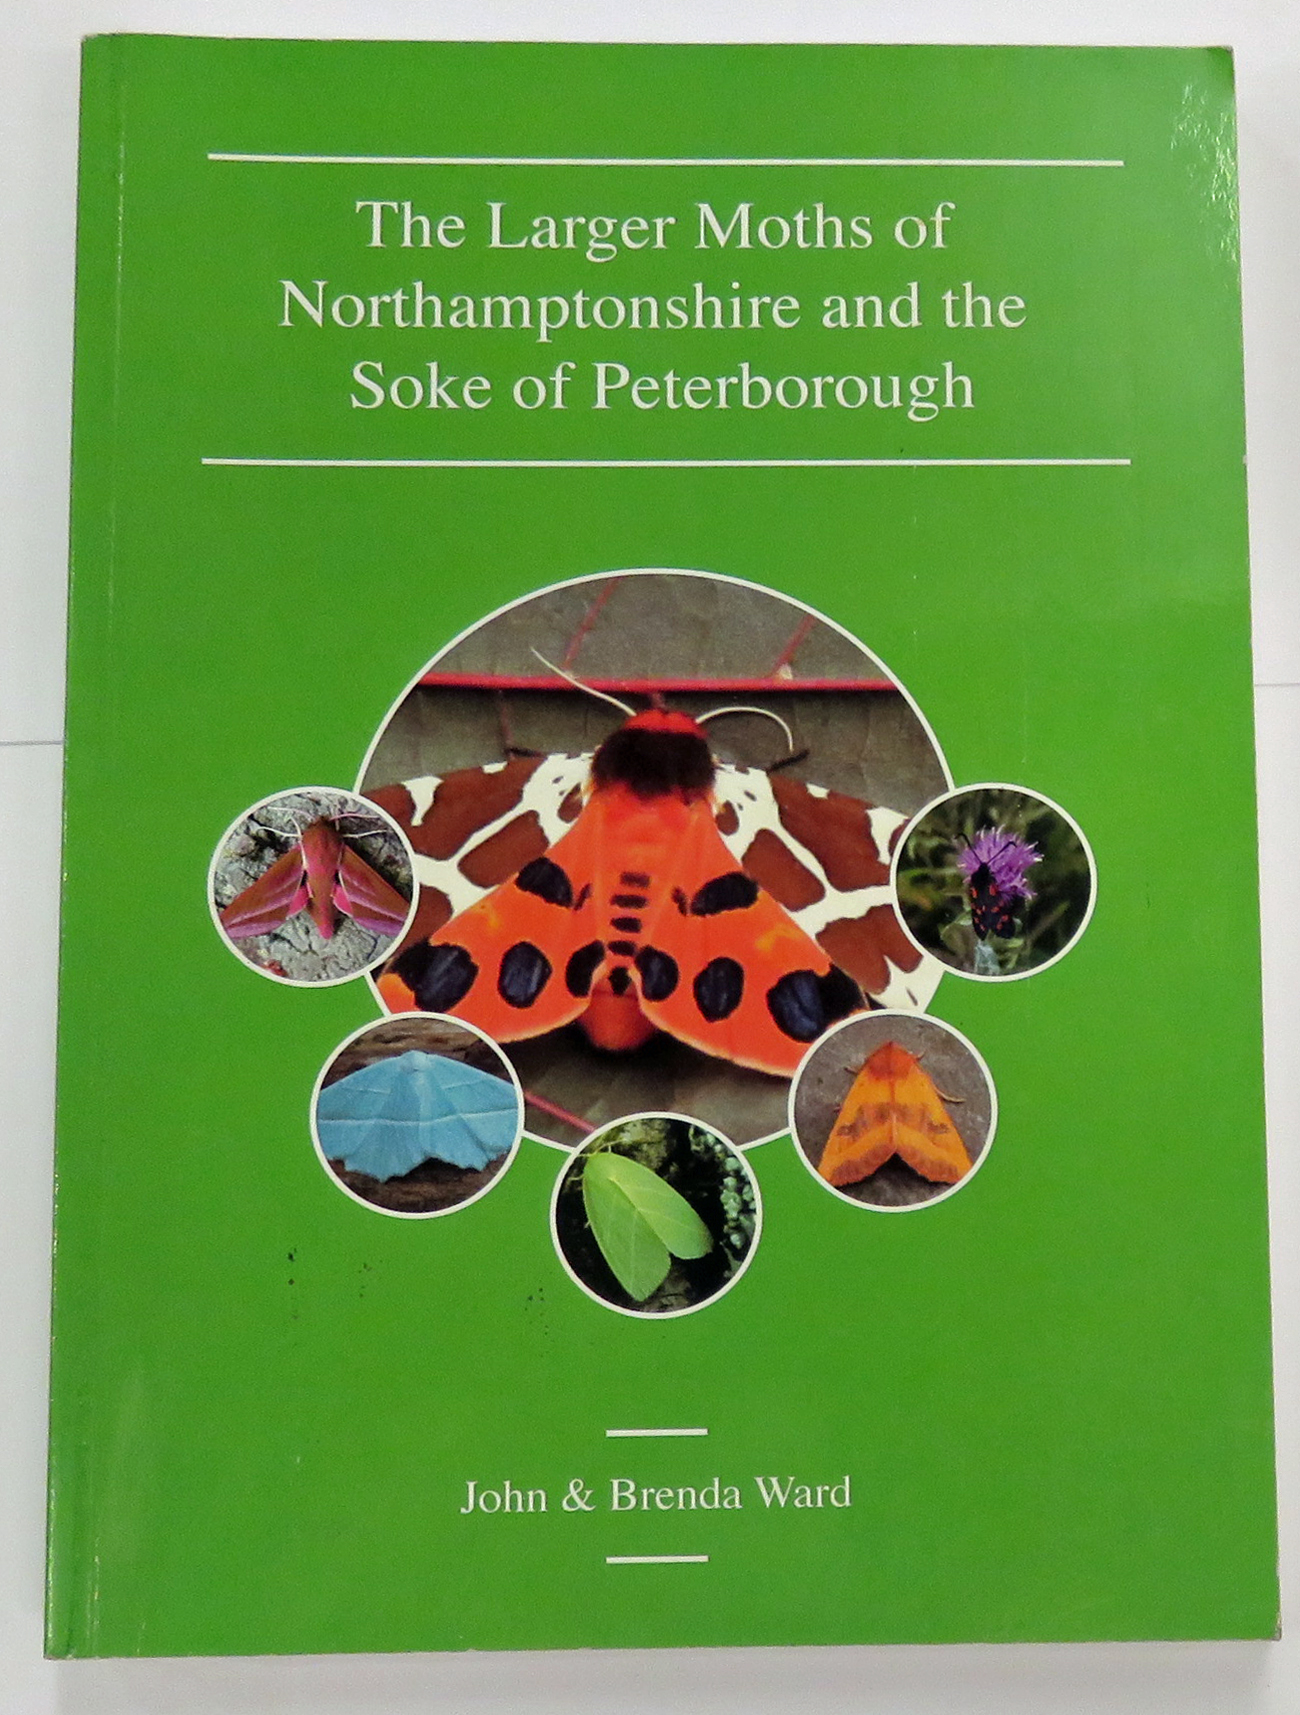 The Larger Moths of Northamptonshire and the Soke of Peterborough 